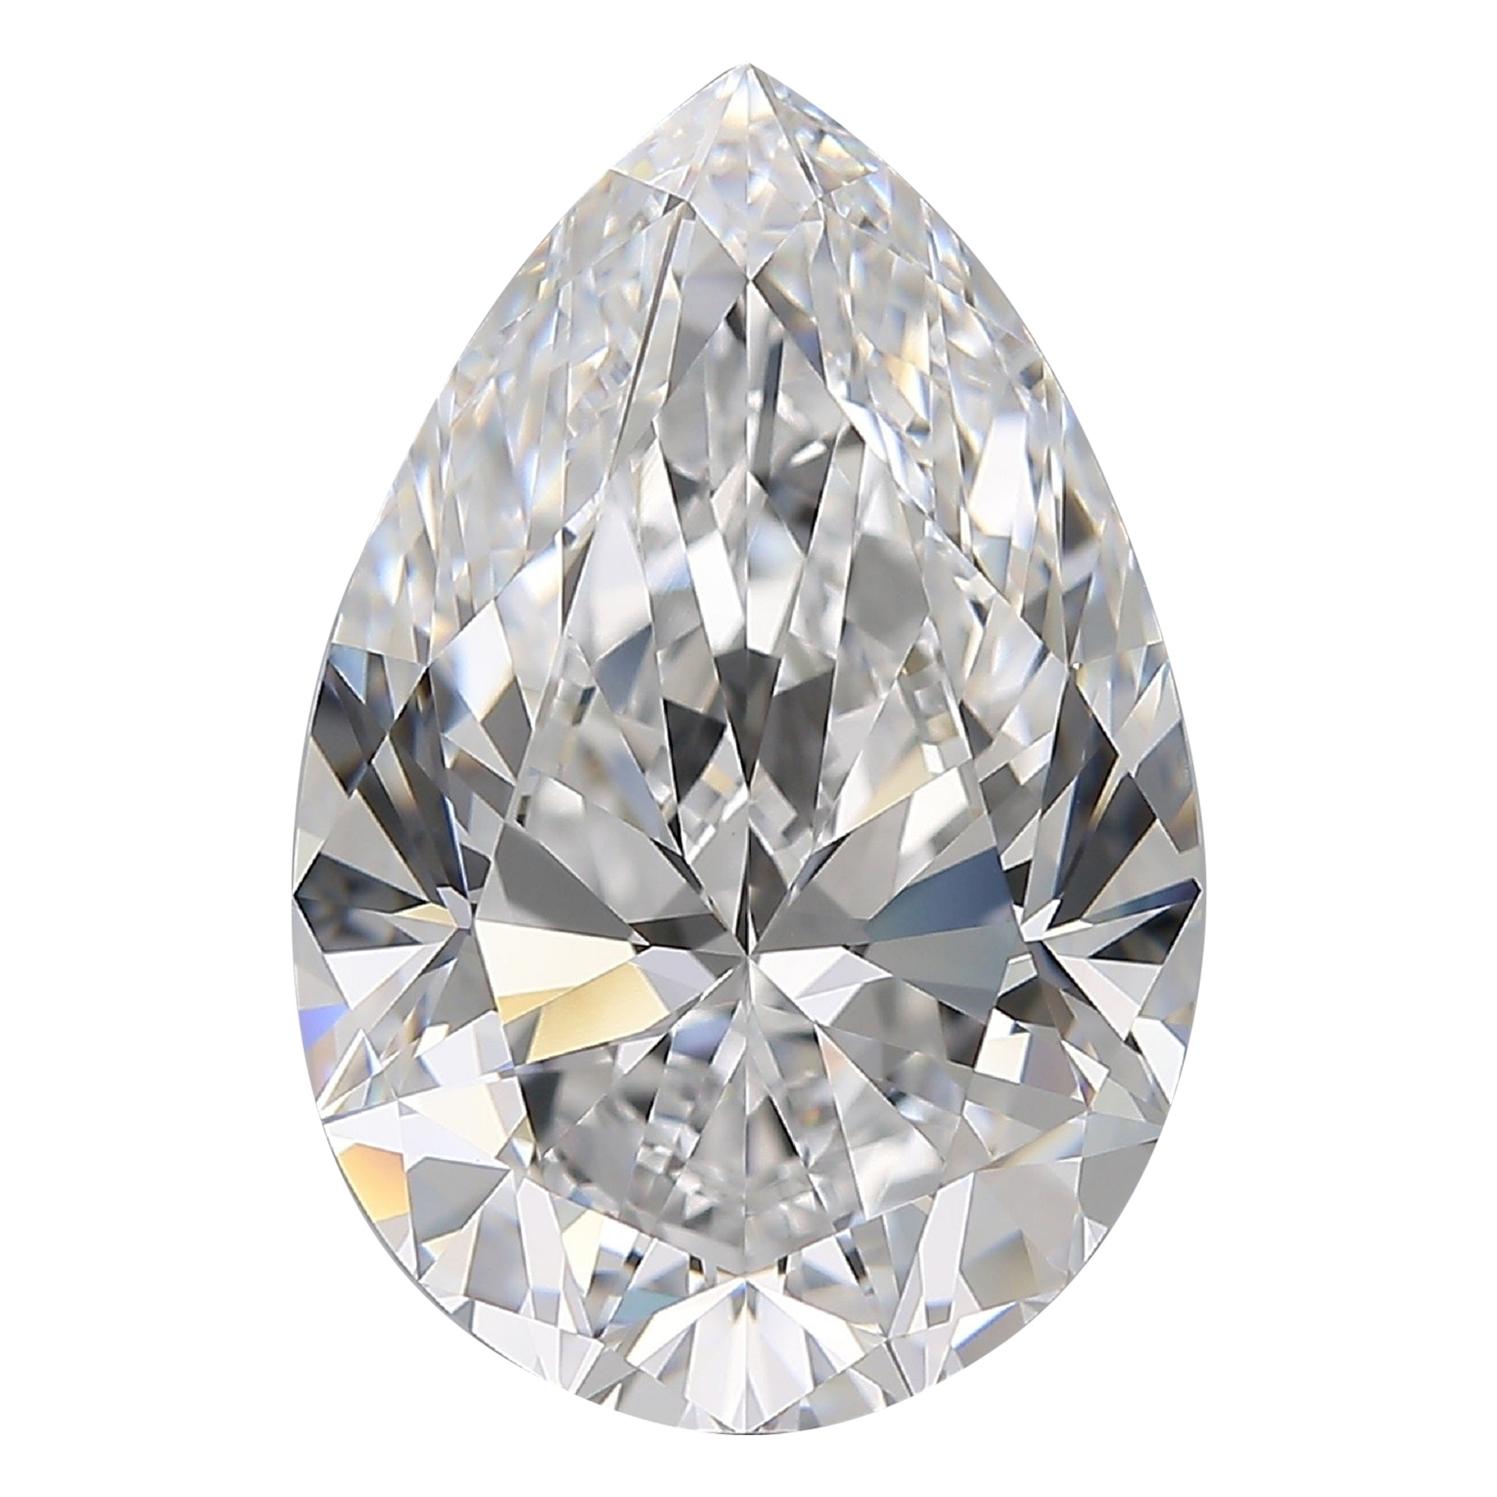 Flawless Clarity D Color GIA Certified 10 Carat Pear Cut Diamond